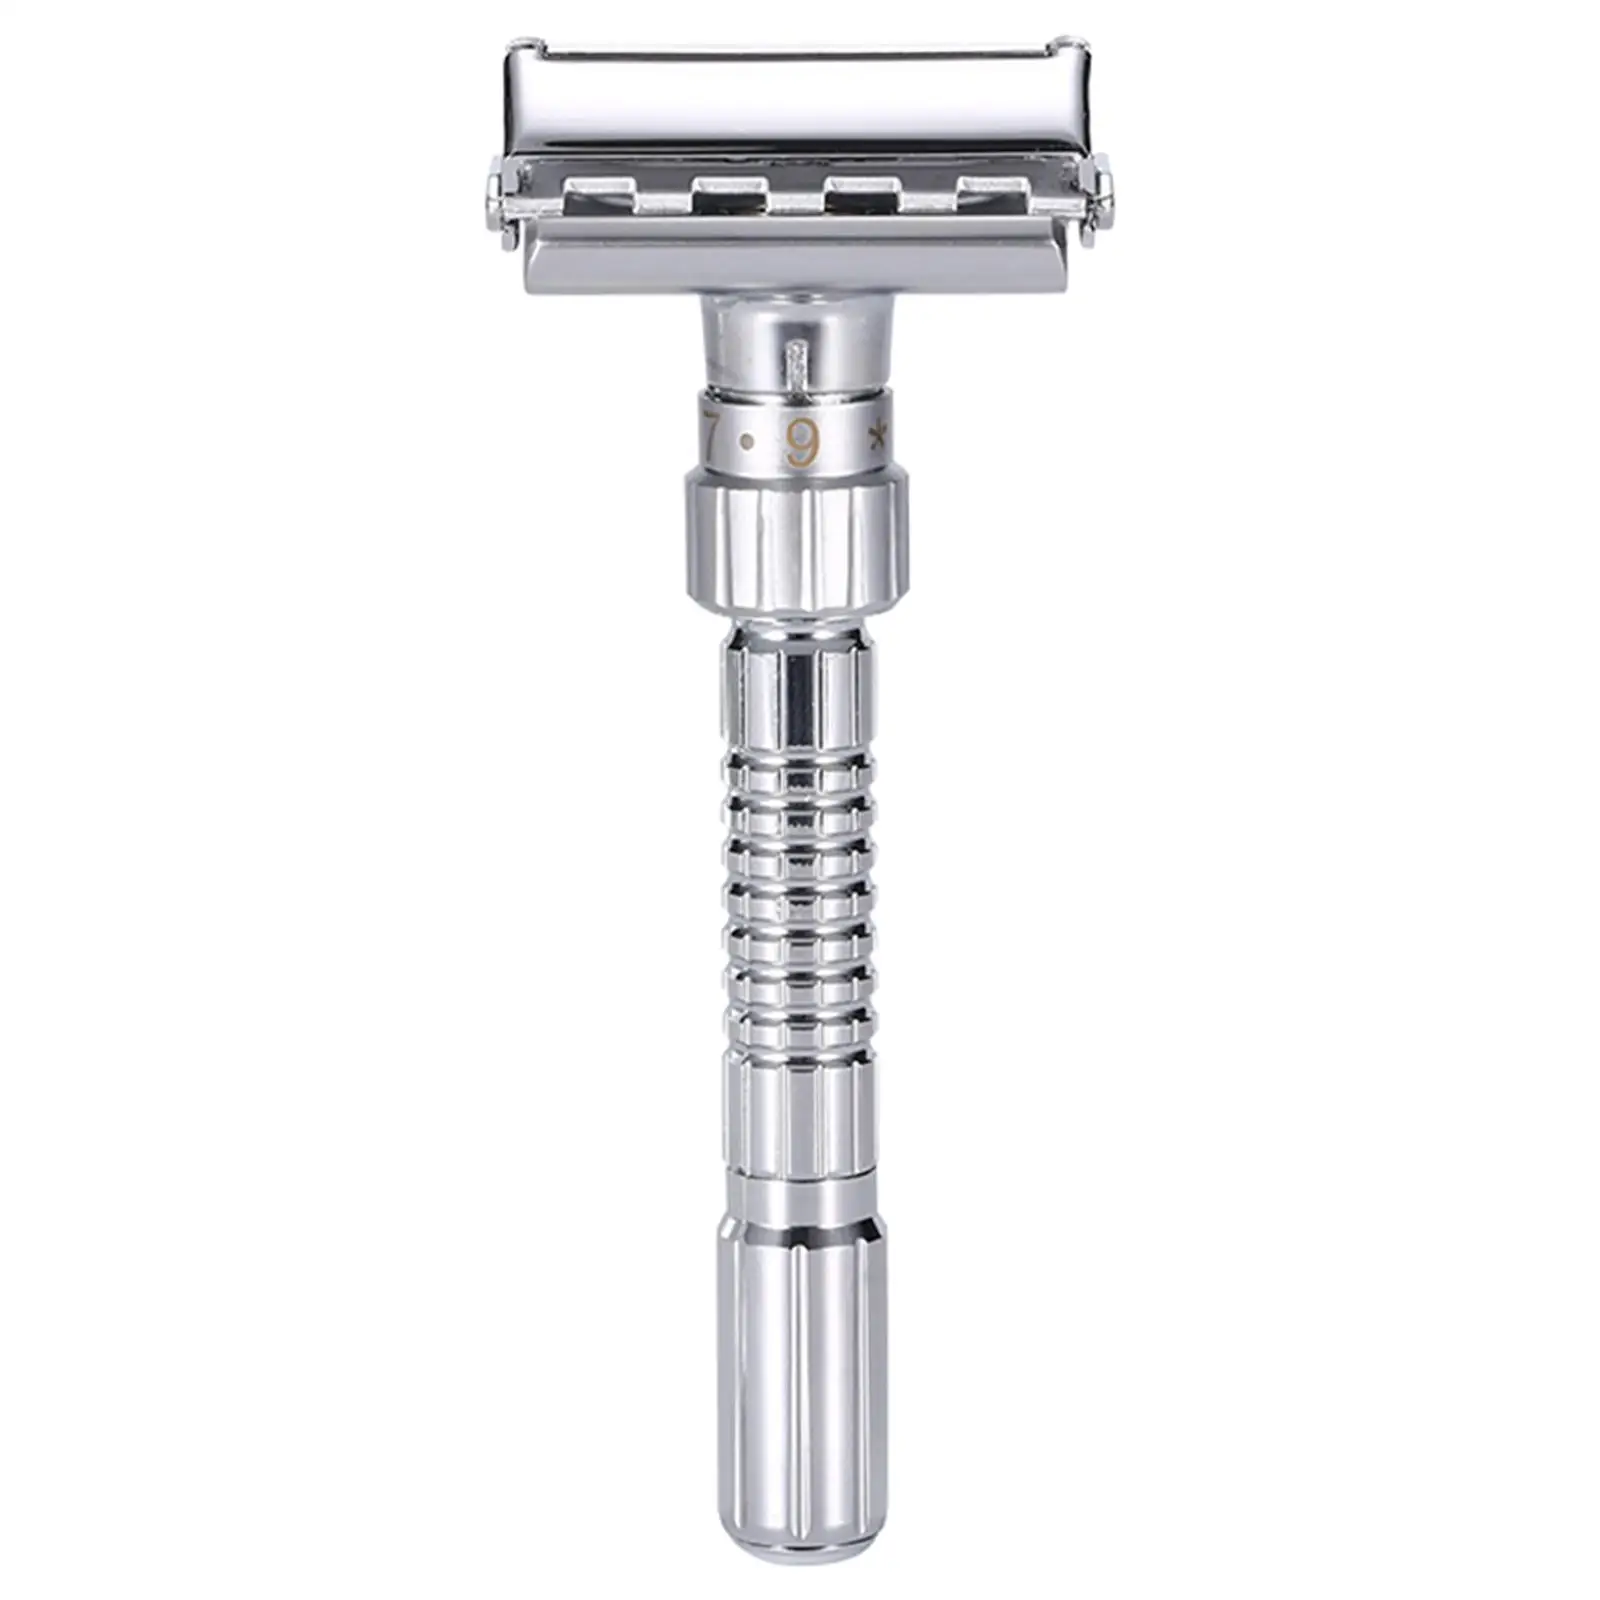 Manual Double Edge Safety Razor with 5 Blades Zinc Alloy Reusable Plated Adjustable Shaver Double Edge Razor for Everyday Use